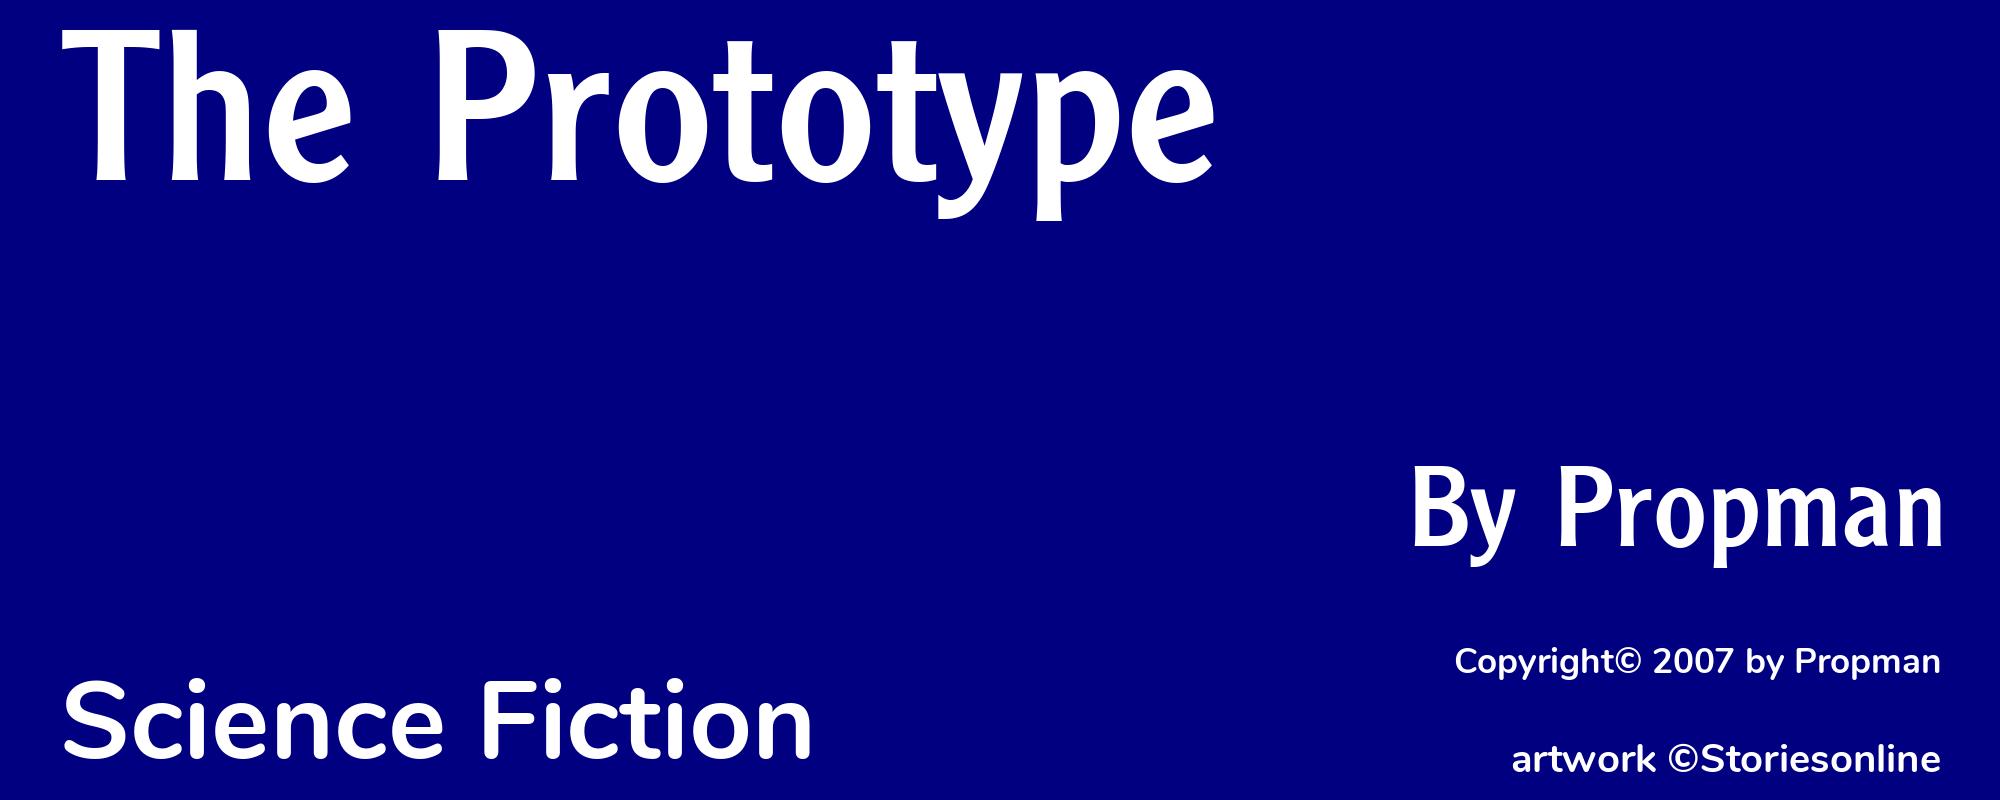 The Prototype - Cover